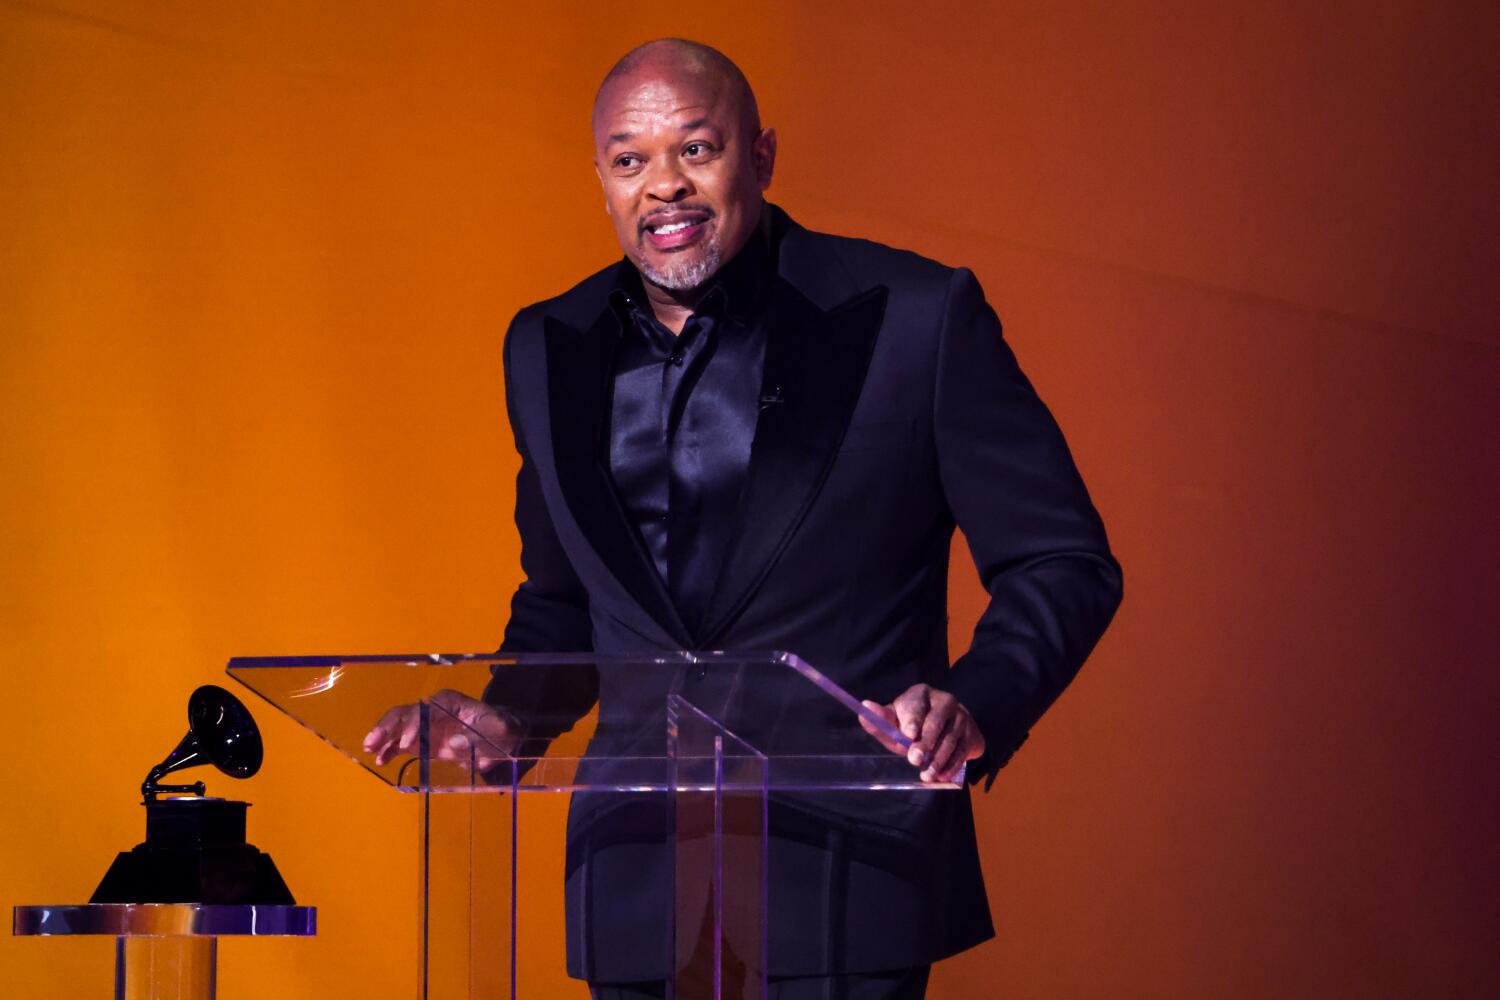 Dr. Dre says he had three strokes when hospitalized for brain aneurysm